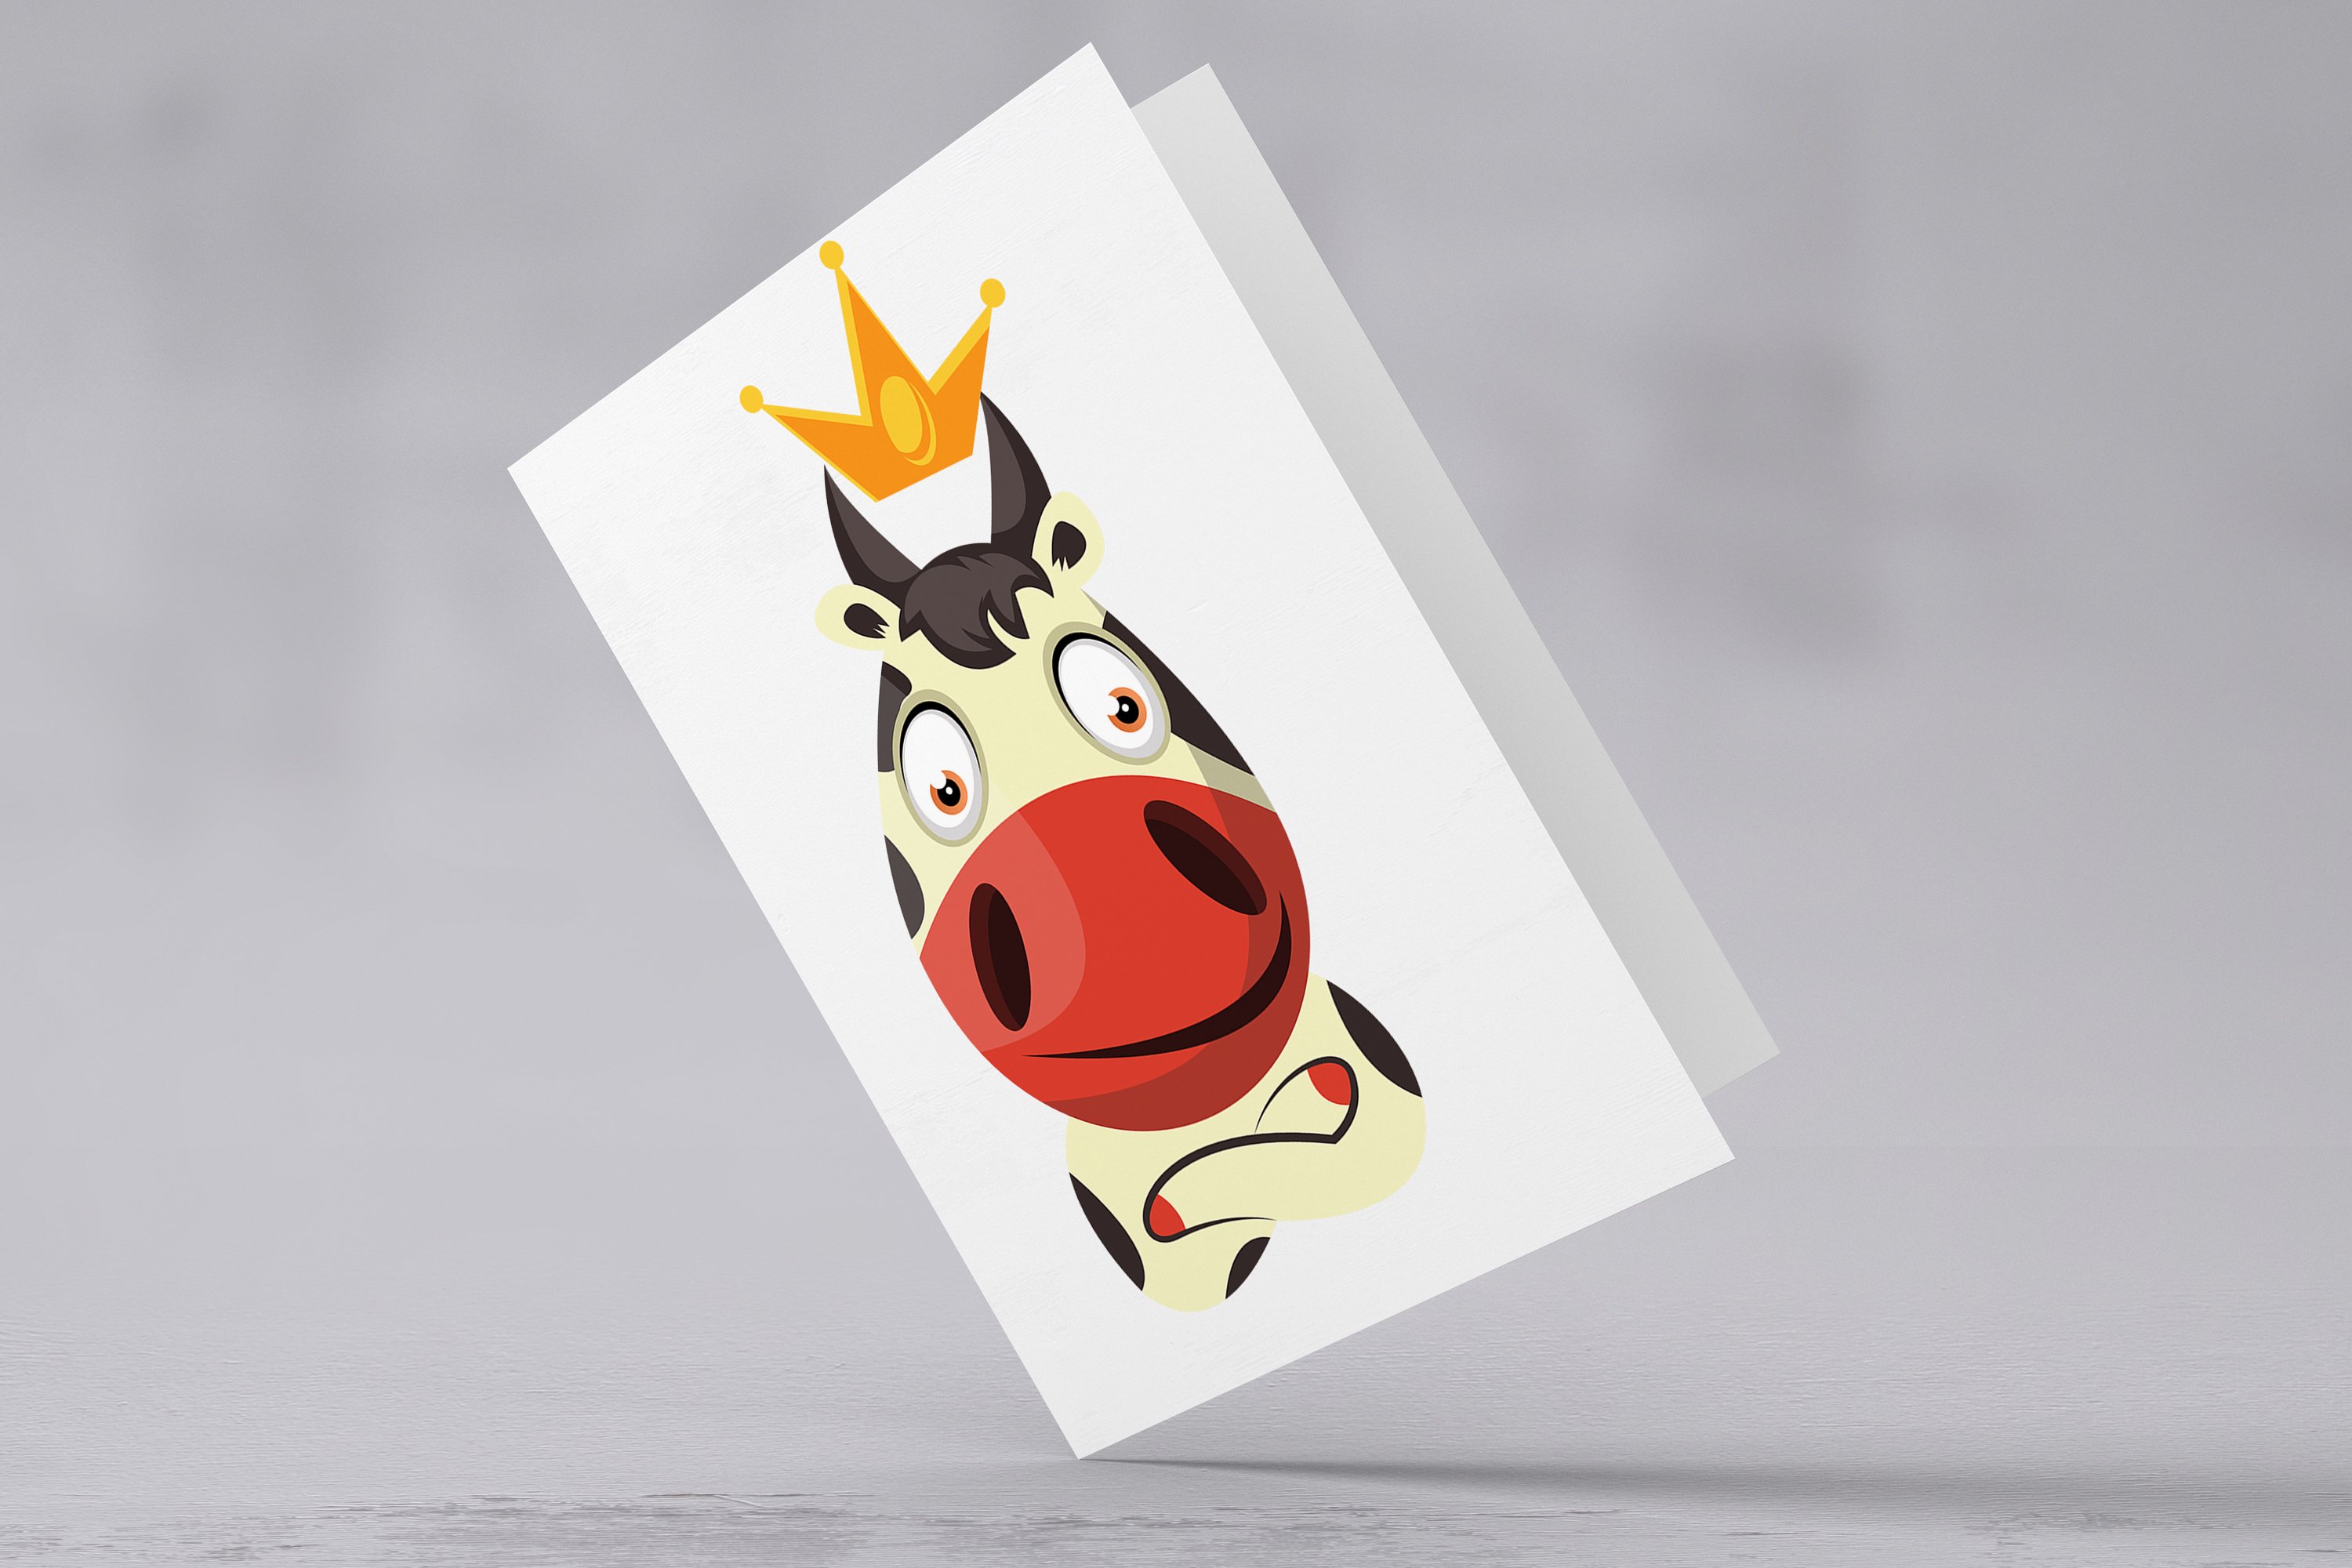 Image postcard with a cheerful emoticon cow.